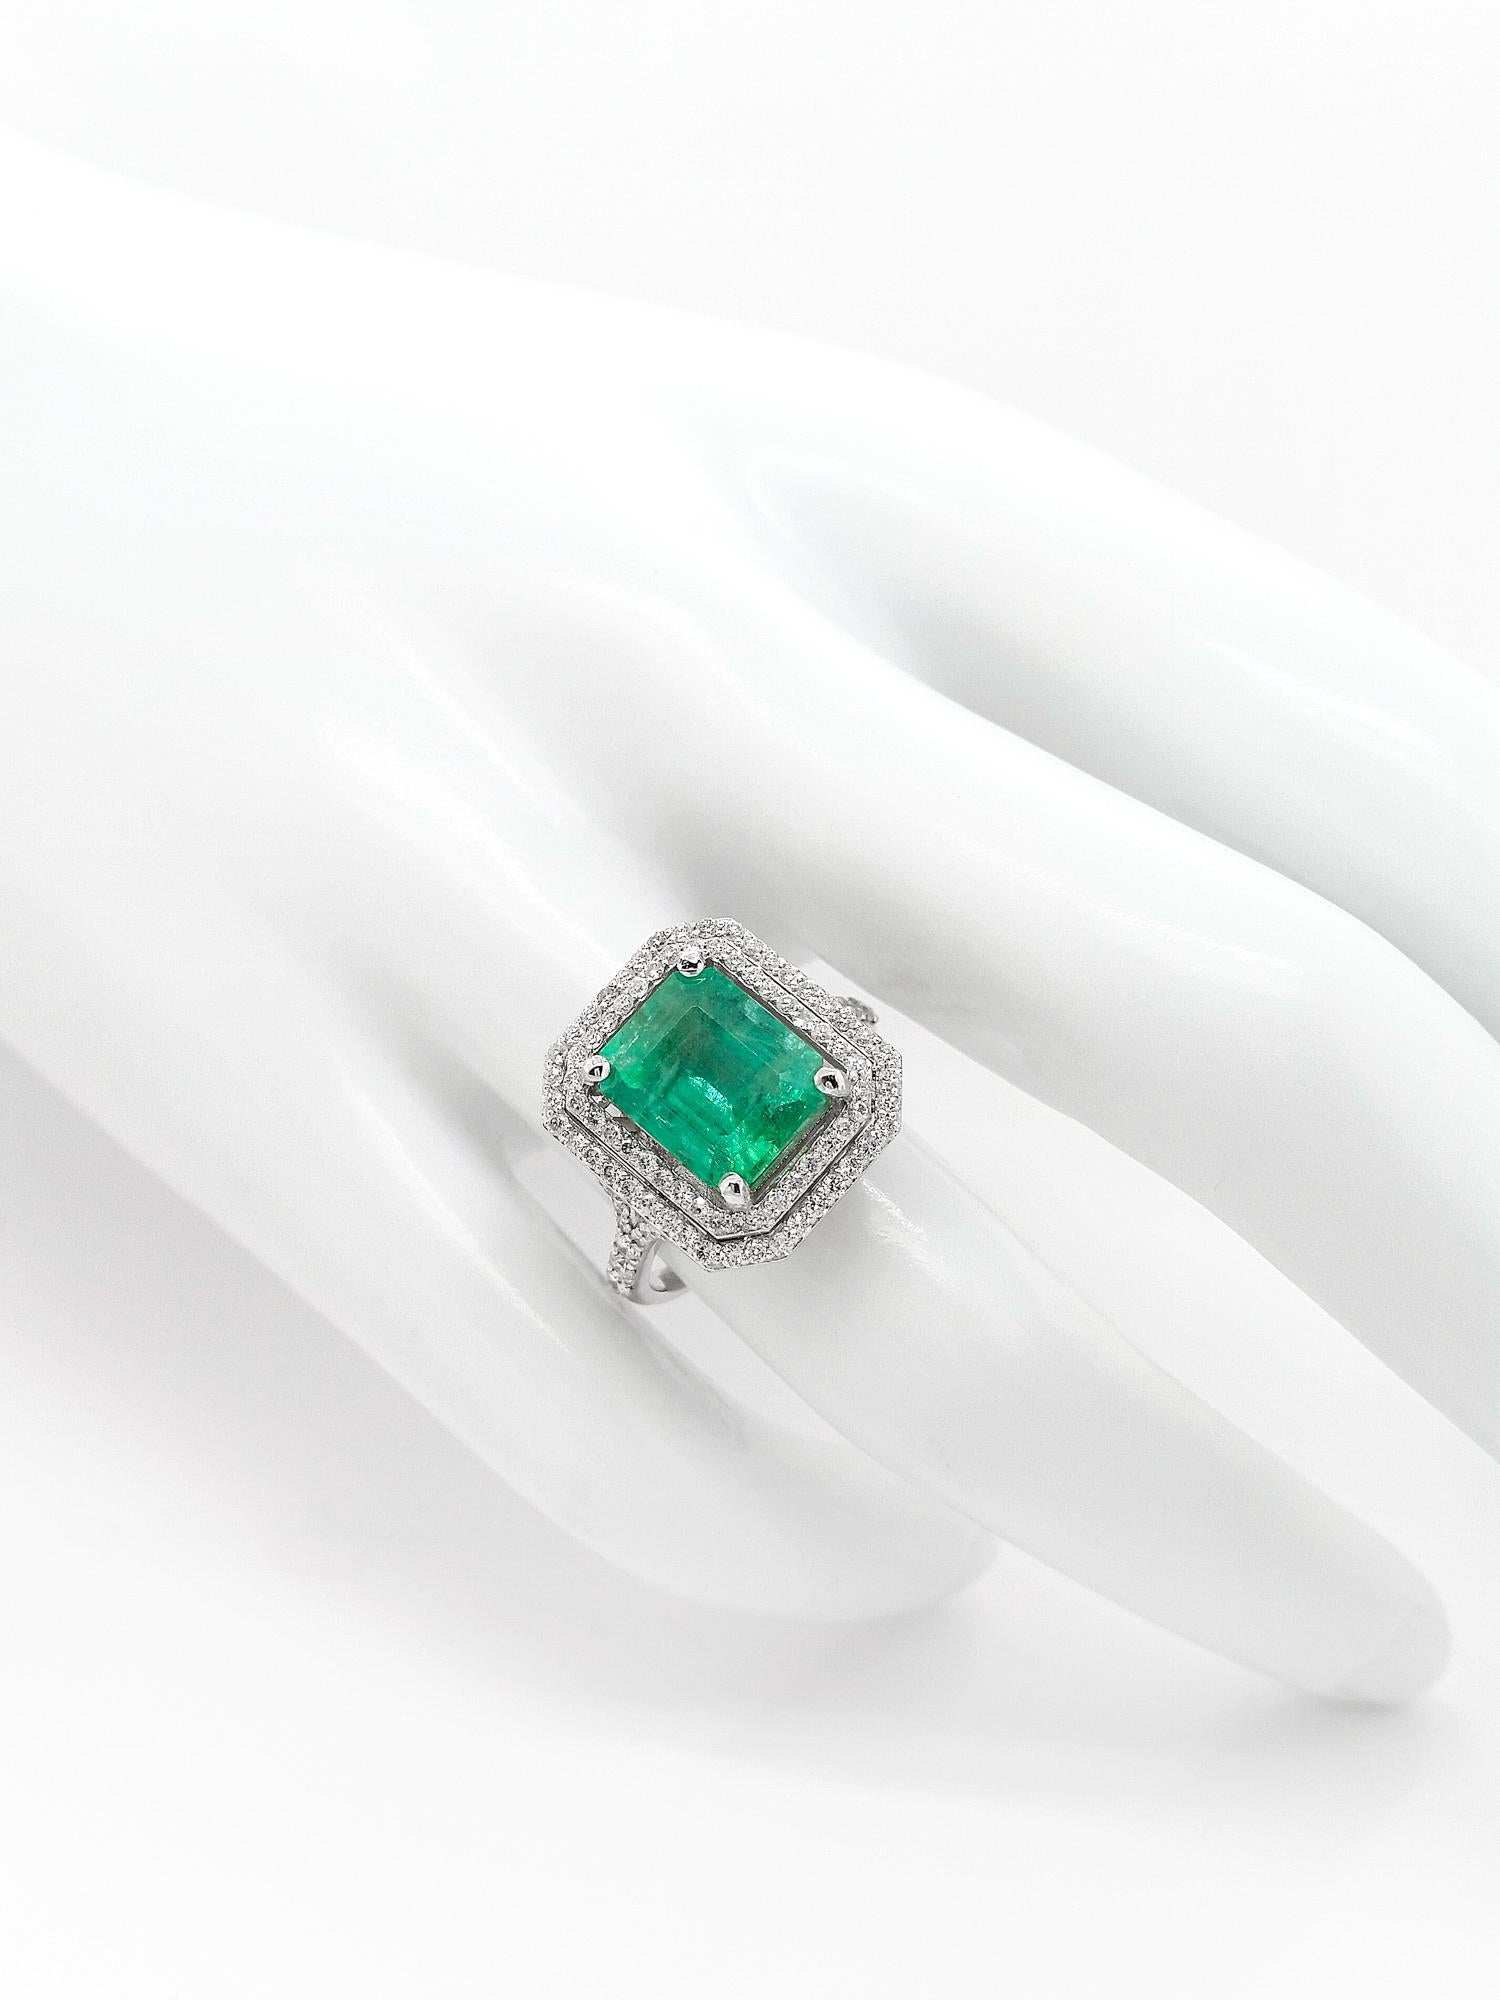 IGI Certified 3.94ct Total Weight Emerald and Diamond Ring 14k White Gold 1